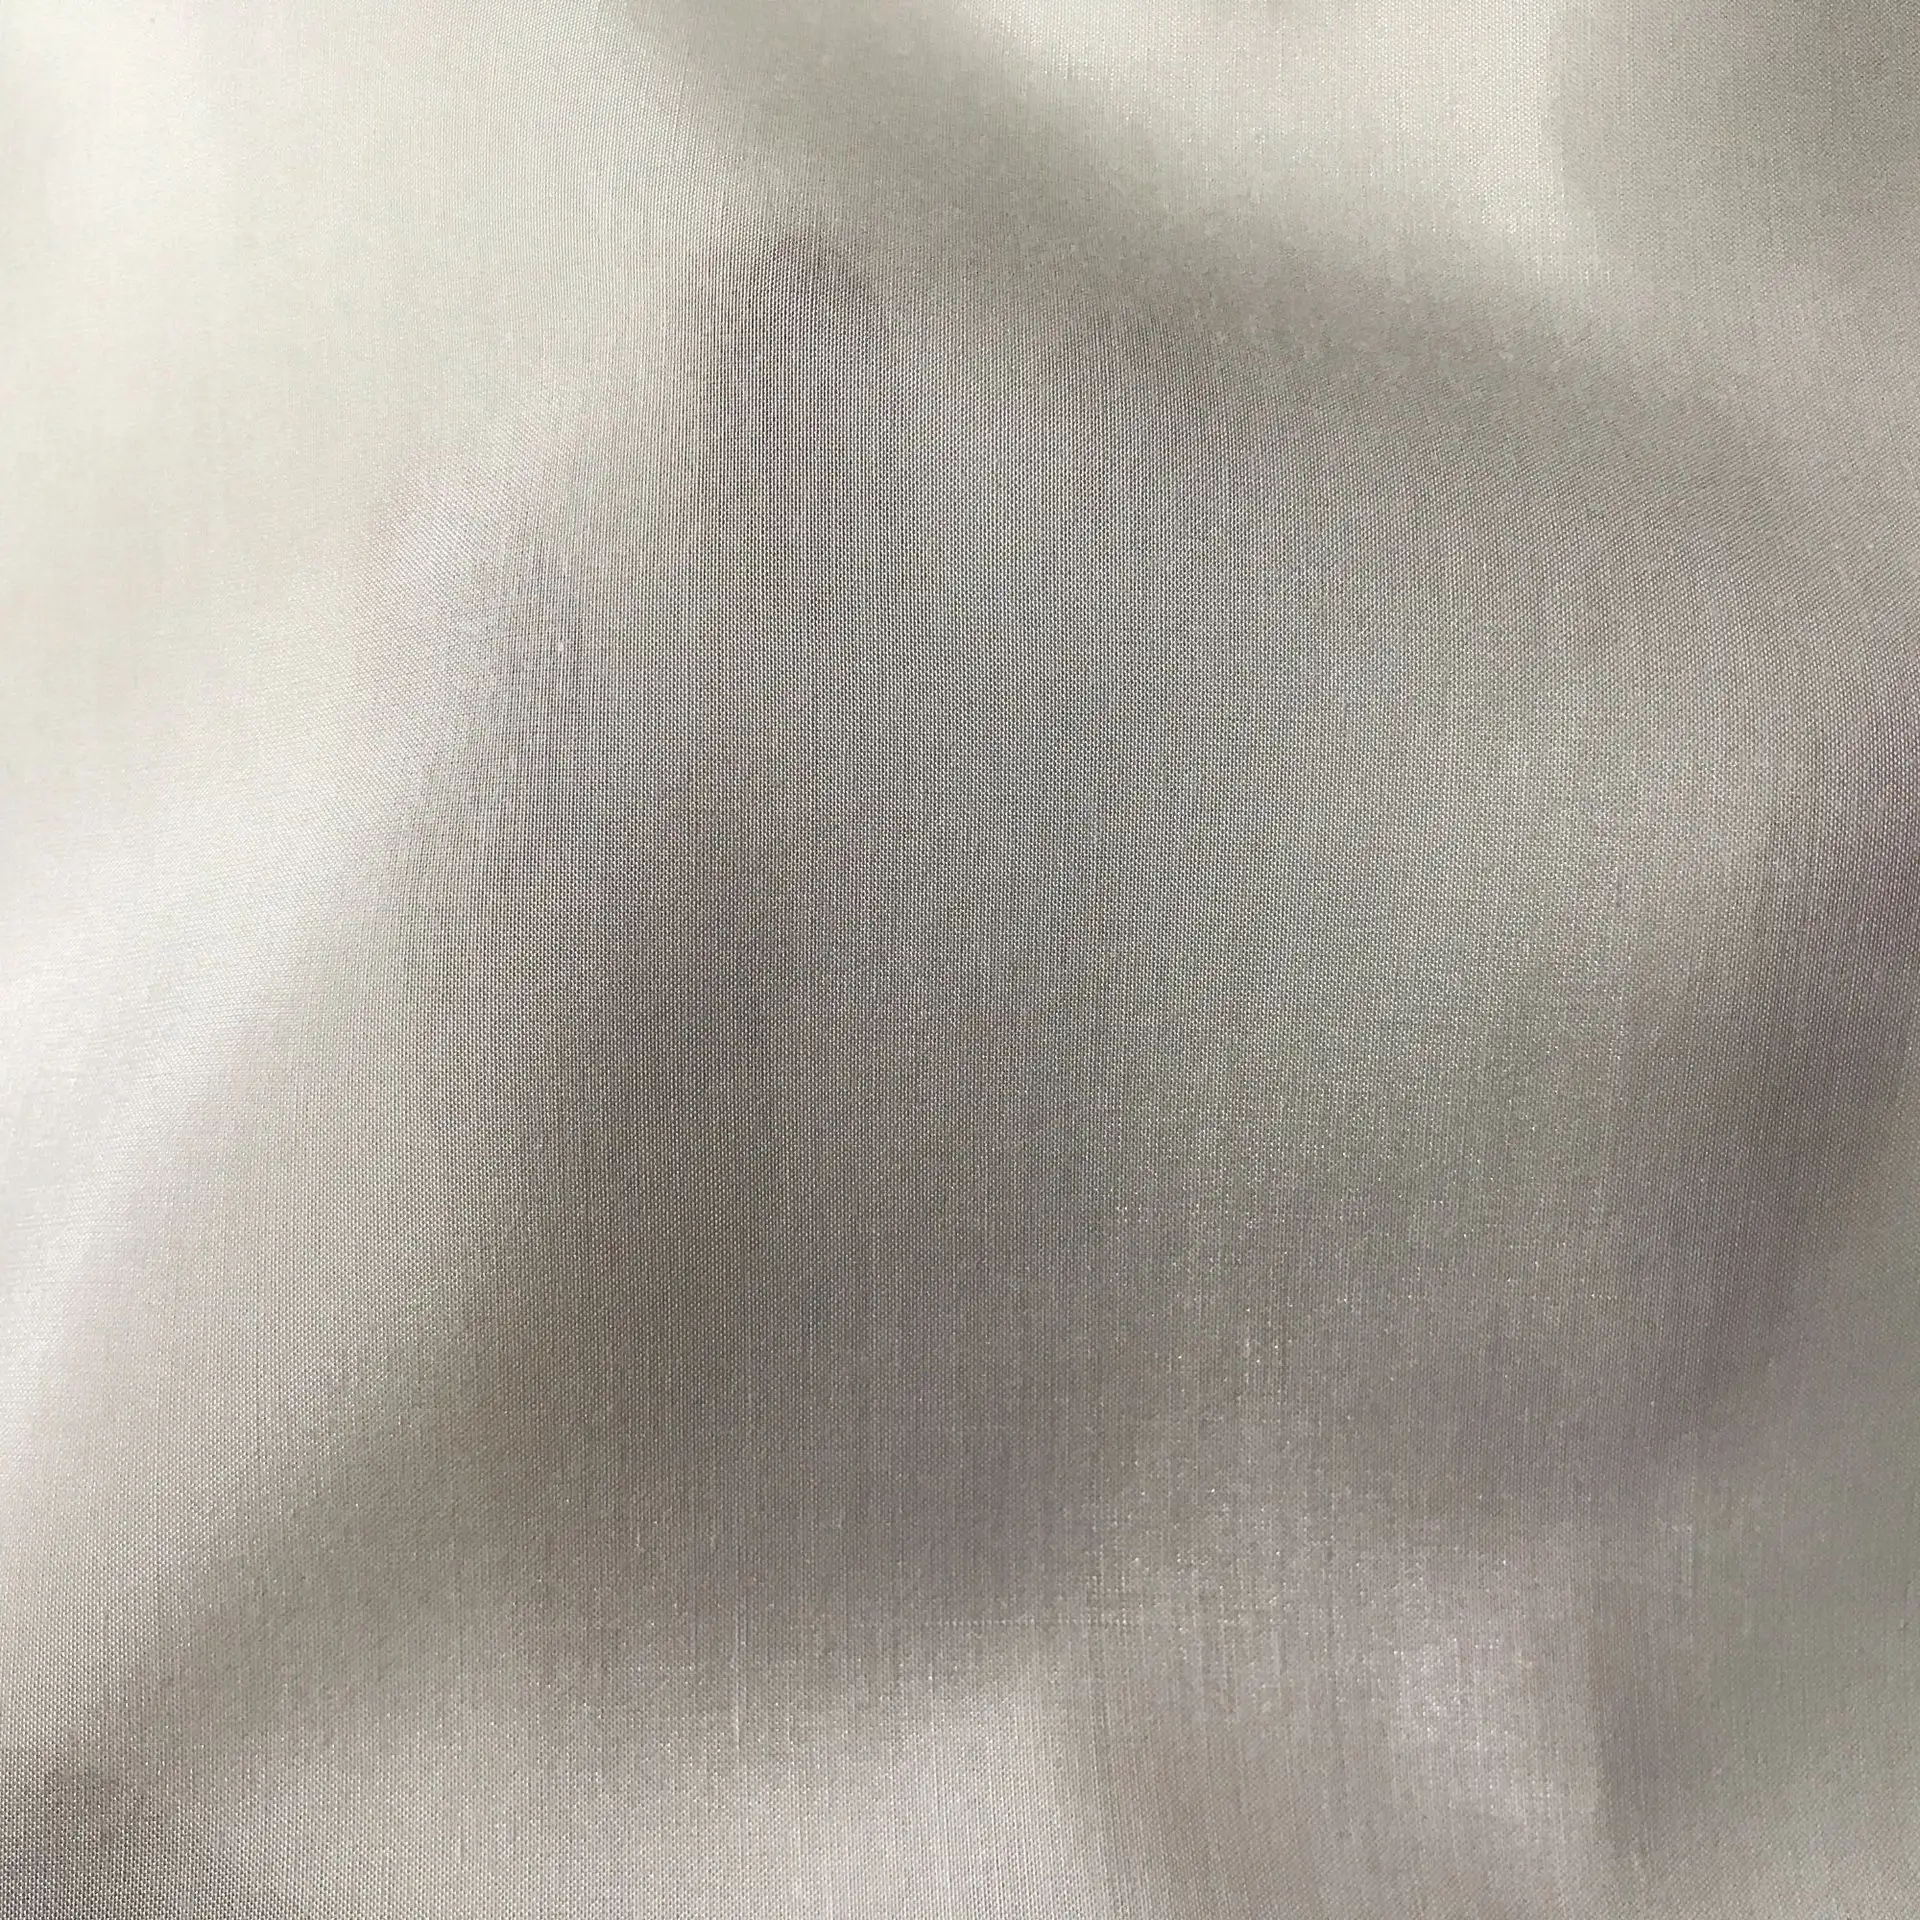 Mulberry Silk Cotton Blend Fabric 100% Pure Silk Habotai Charmeuse Fabrics for Printing Dying